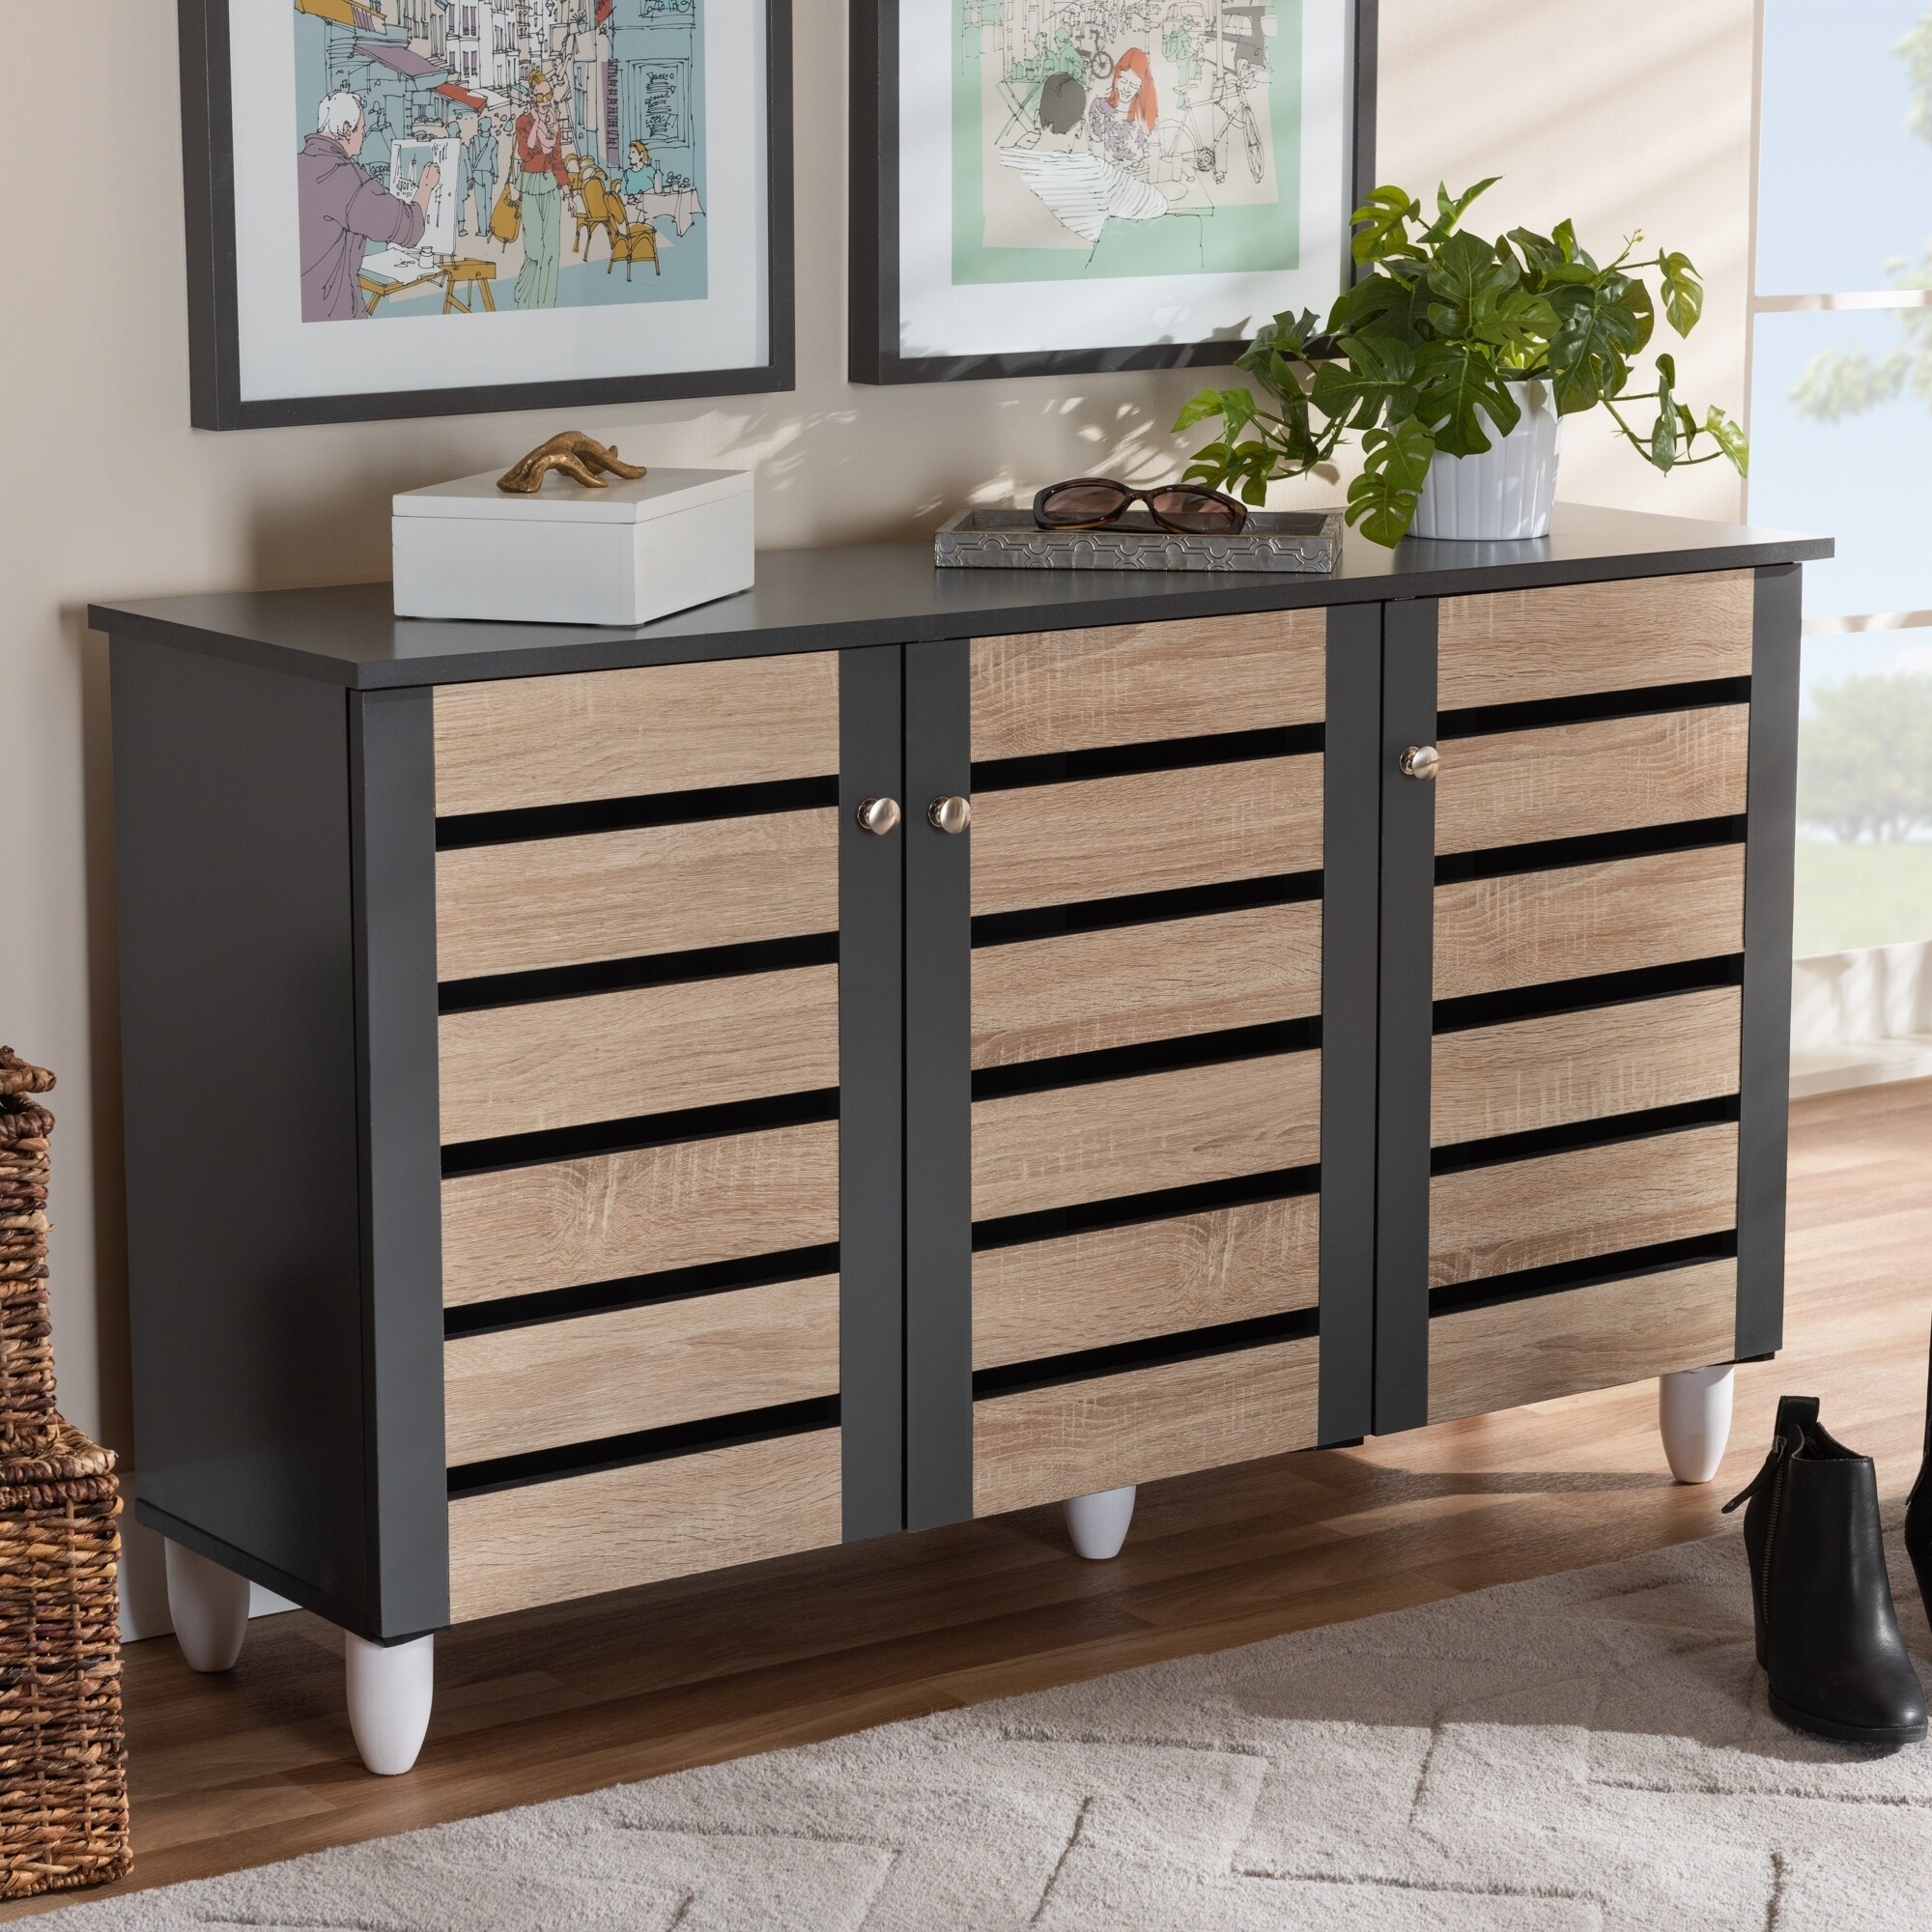 Shop Contemporary Shoe Storage Cabinet On Sale Overstock